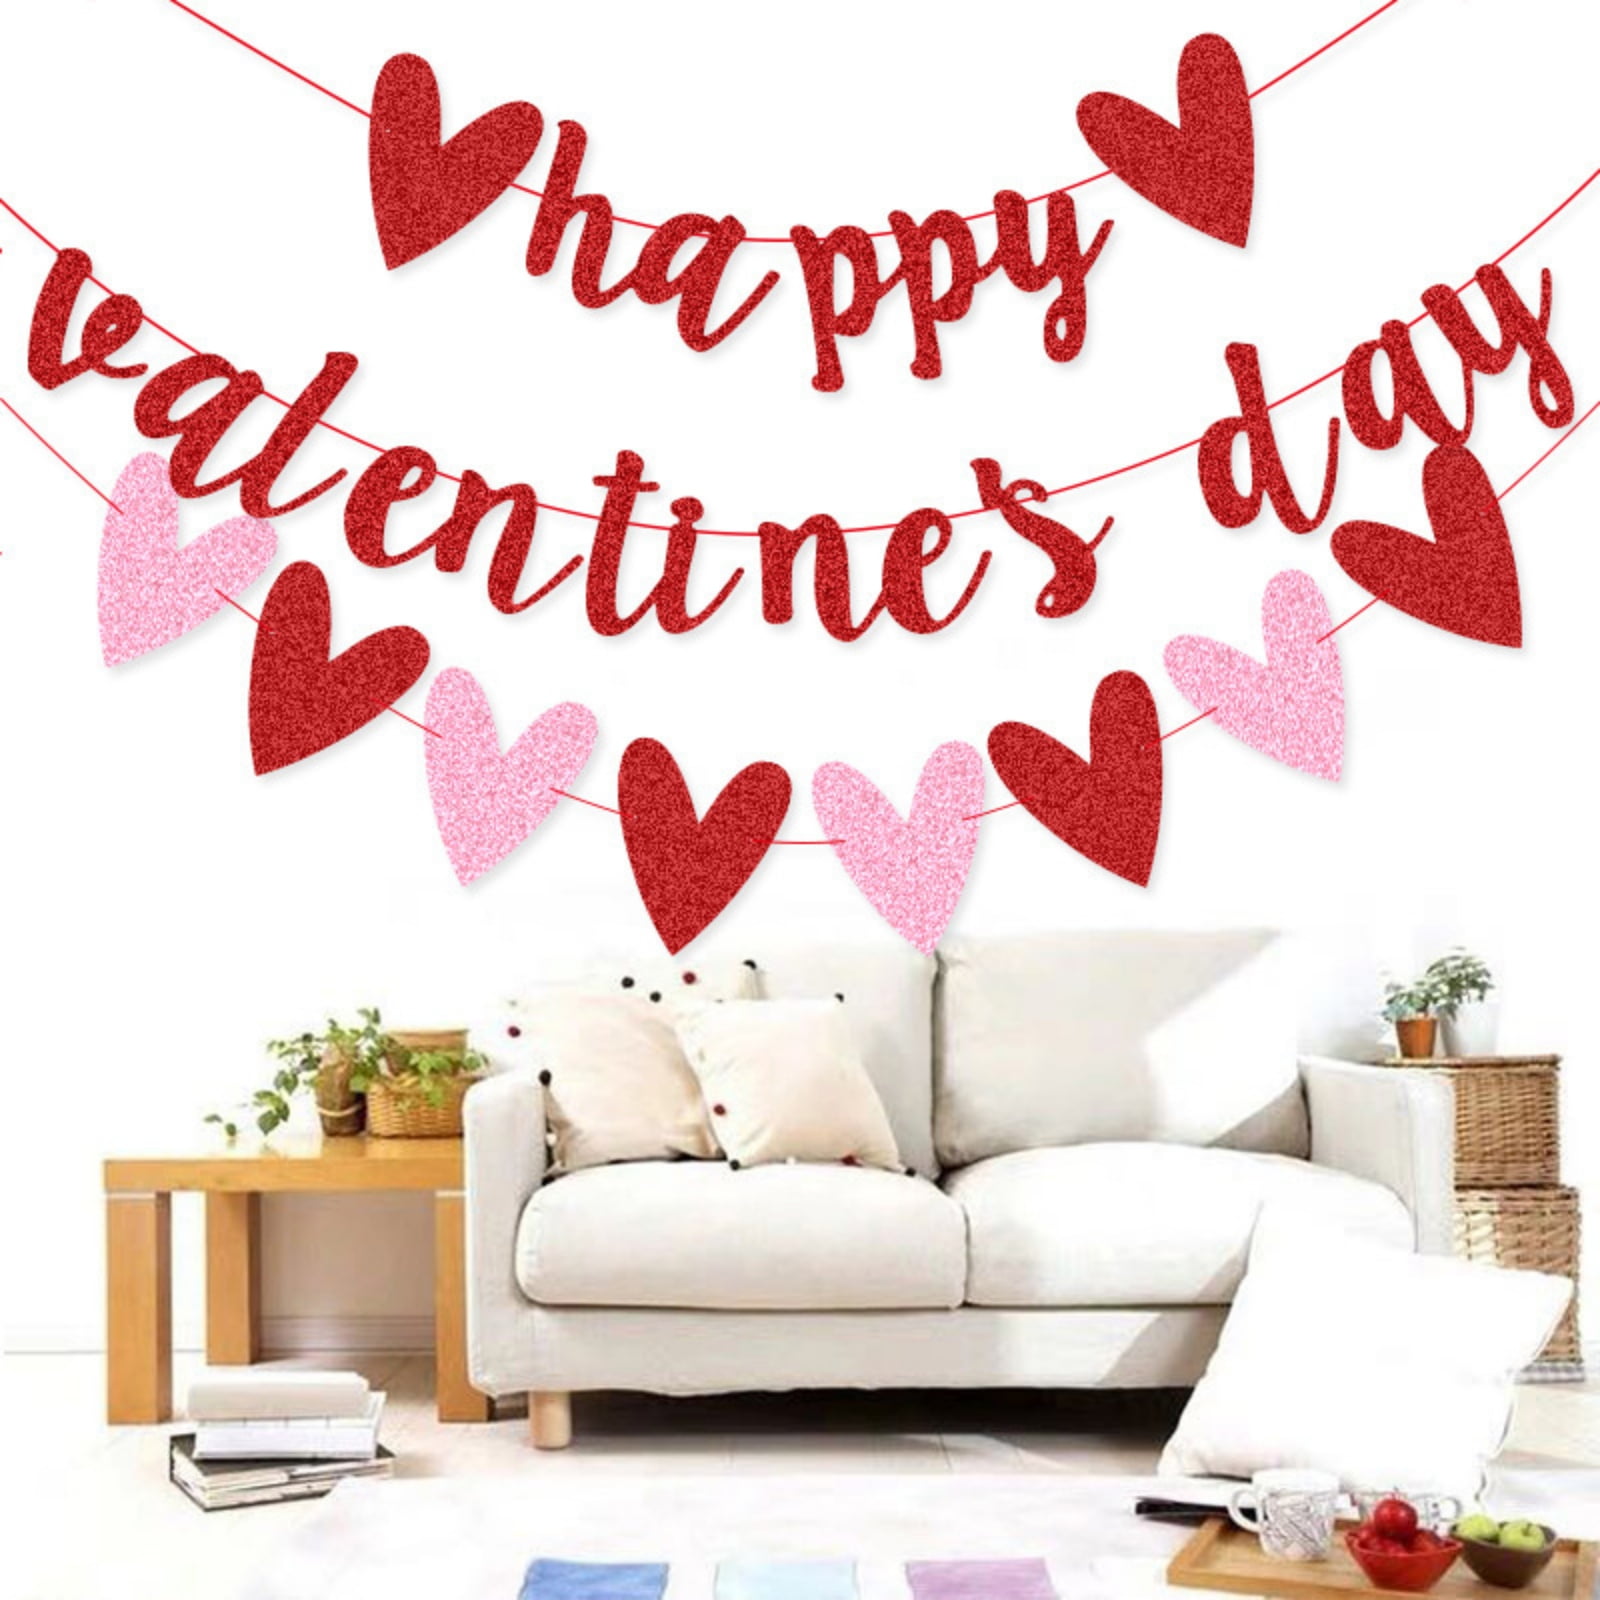 Decorating a Living Room for Valentine's Day with Streamers